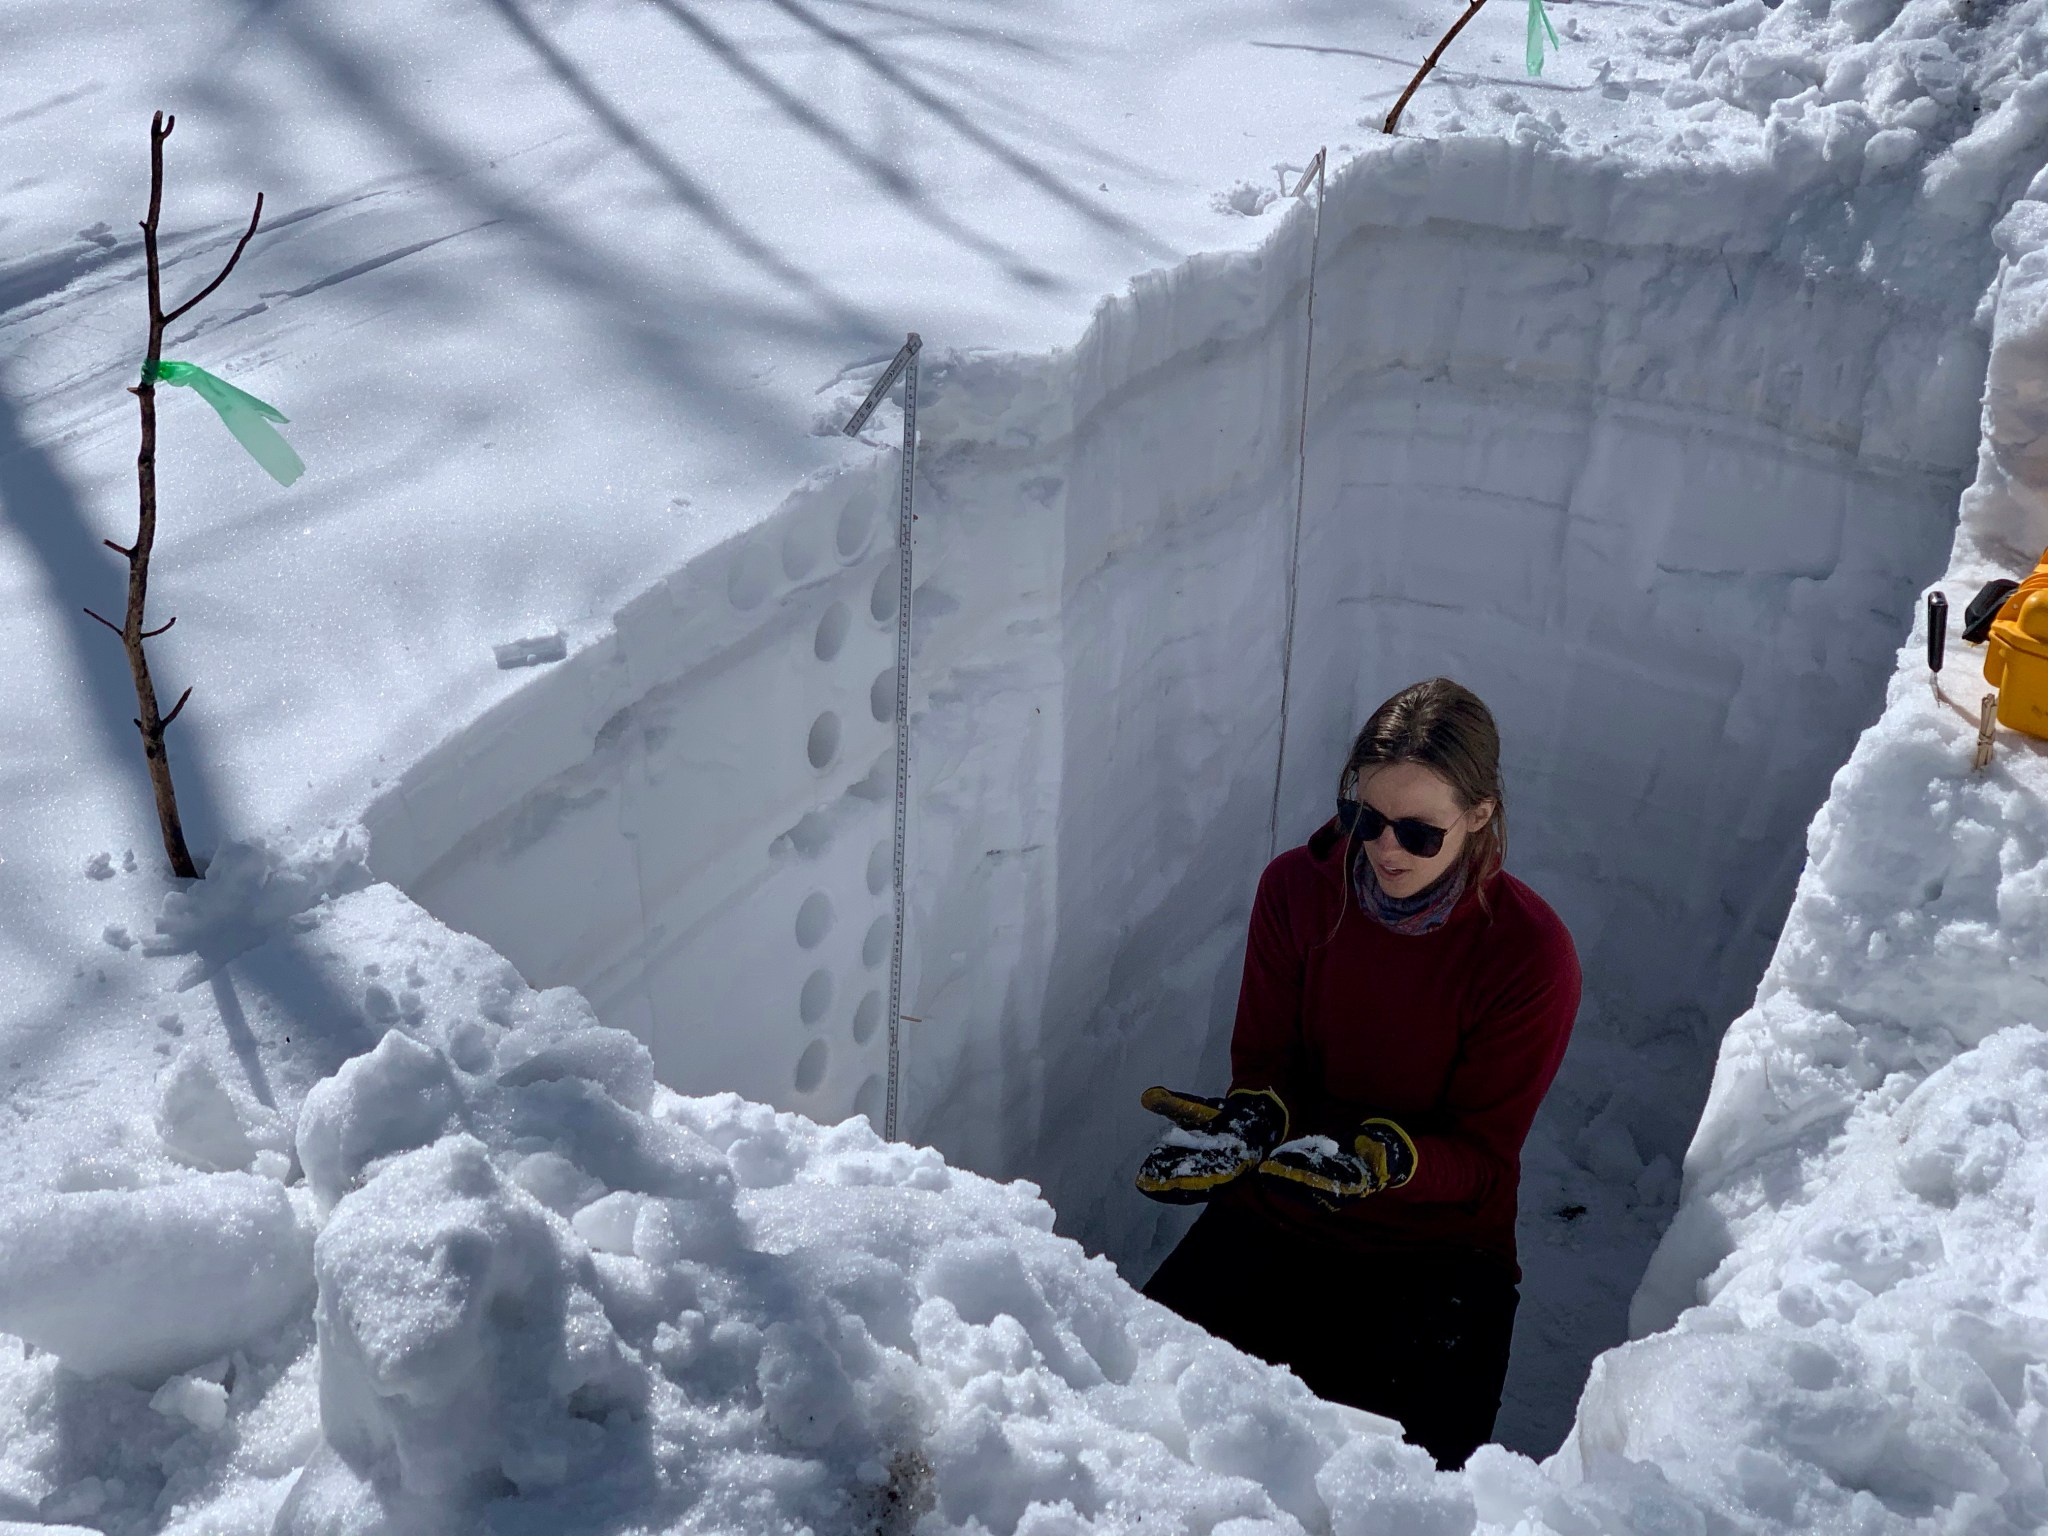 A young woman in winter gear kneels at the bottom of a snow pit the size of a car, with her outstretched mittens lightly dusted with snow. Circular holes are visible in the sides of the pit where scientists took snow samples earlier.